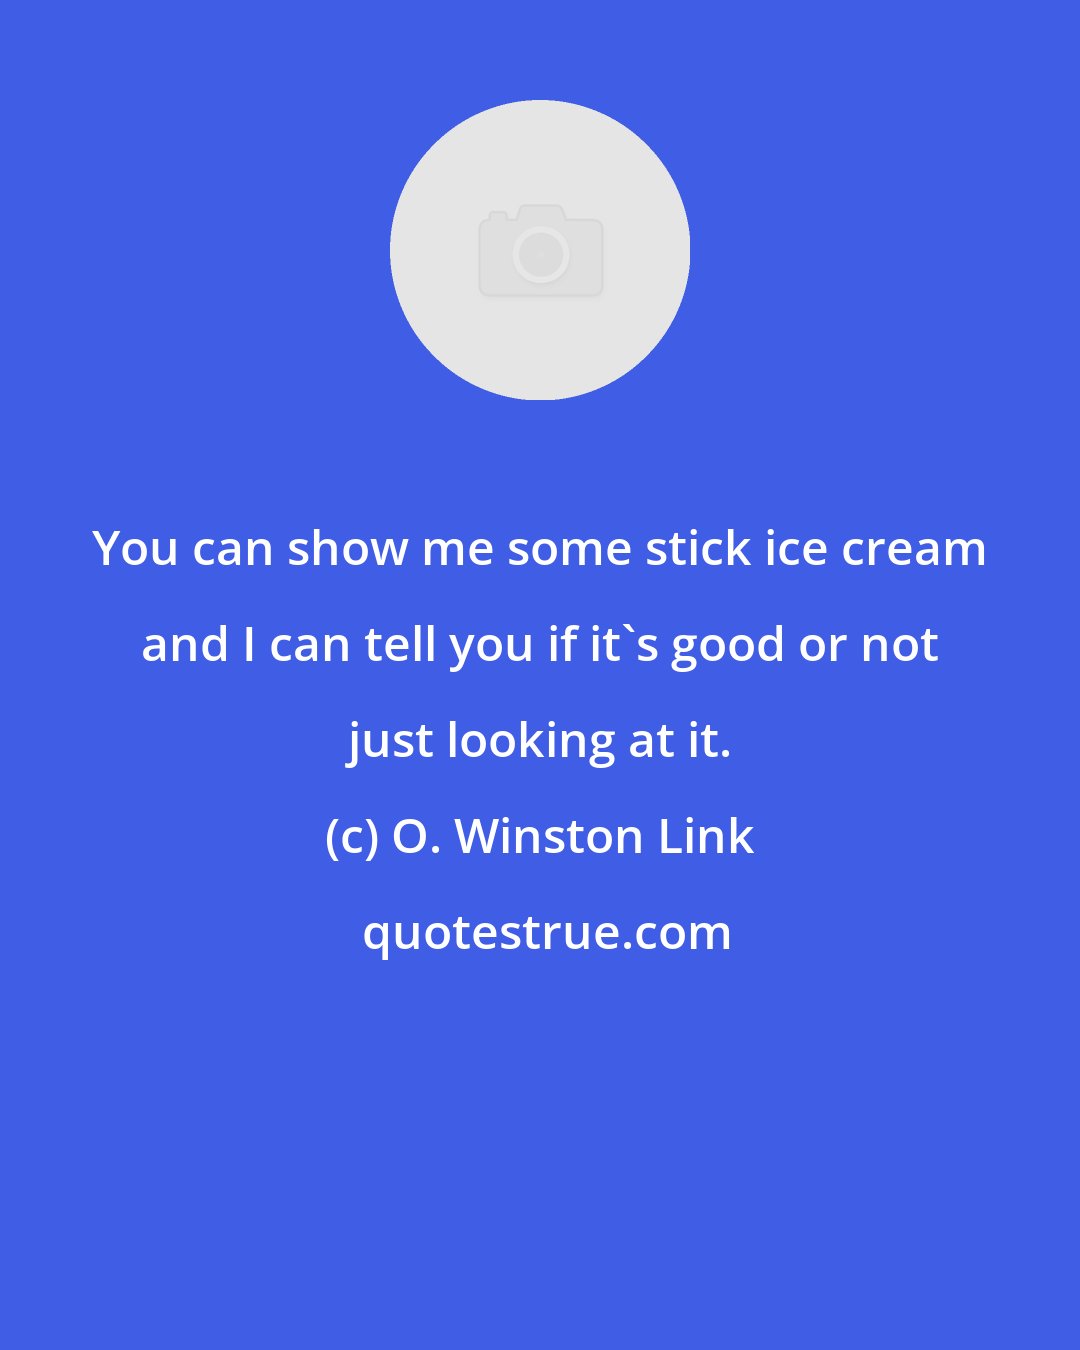 O. Winston Link: You can show me some stick ice cream and I can tell you if it's good or not just looking at it.